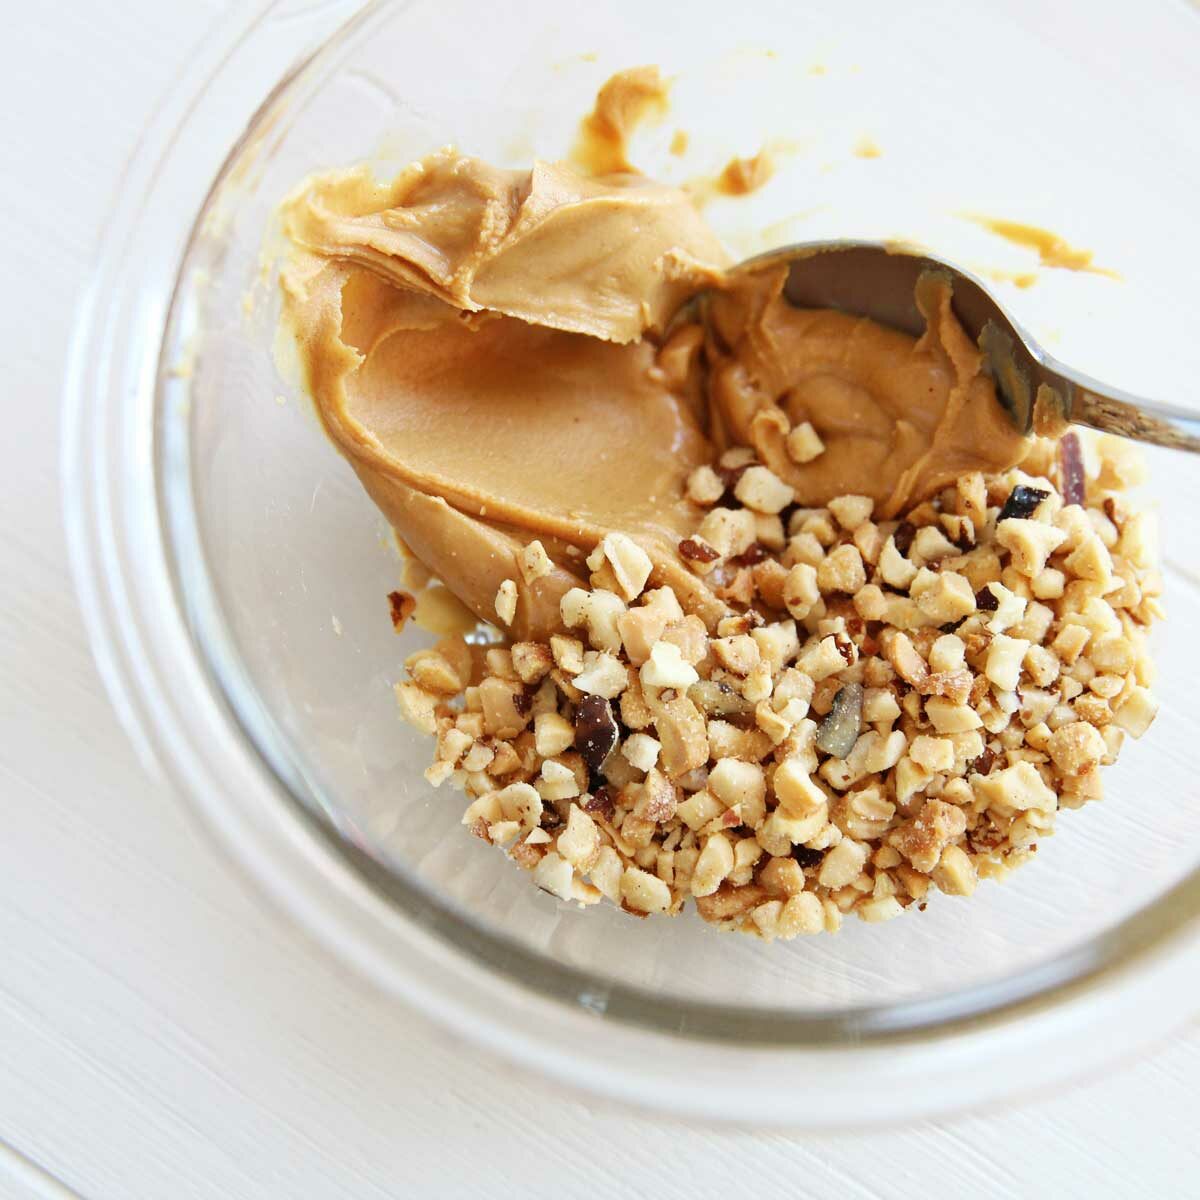 filling - peanut butter and chopped nuts